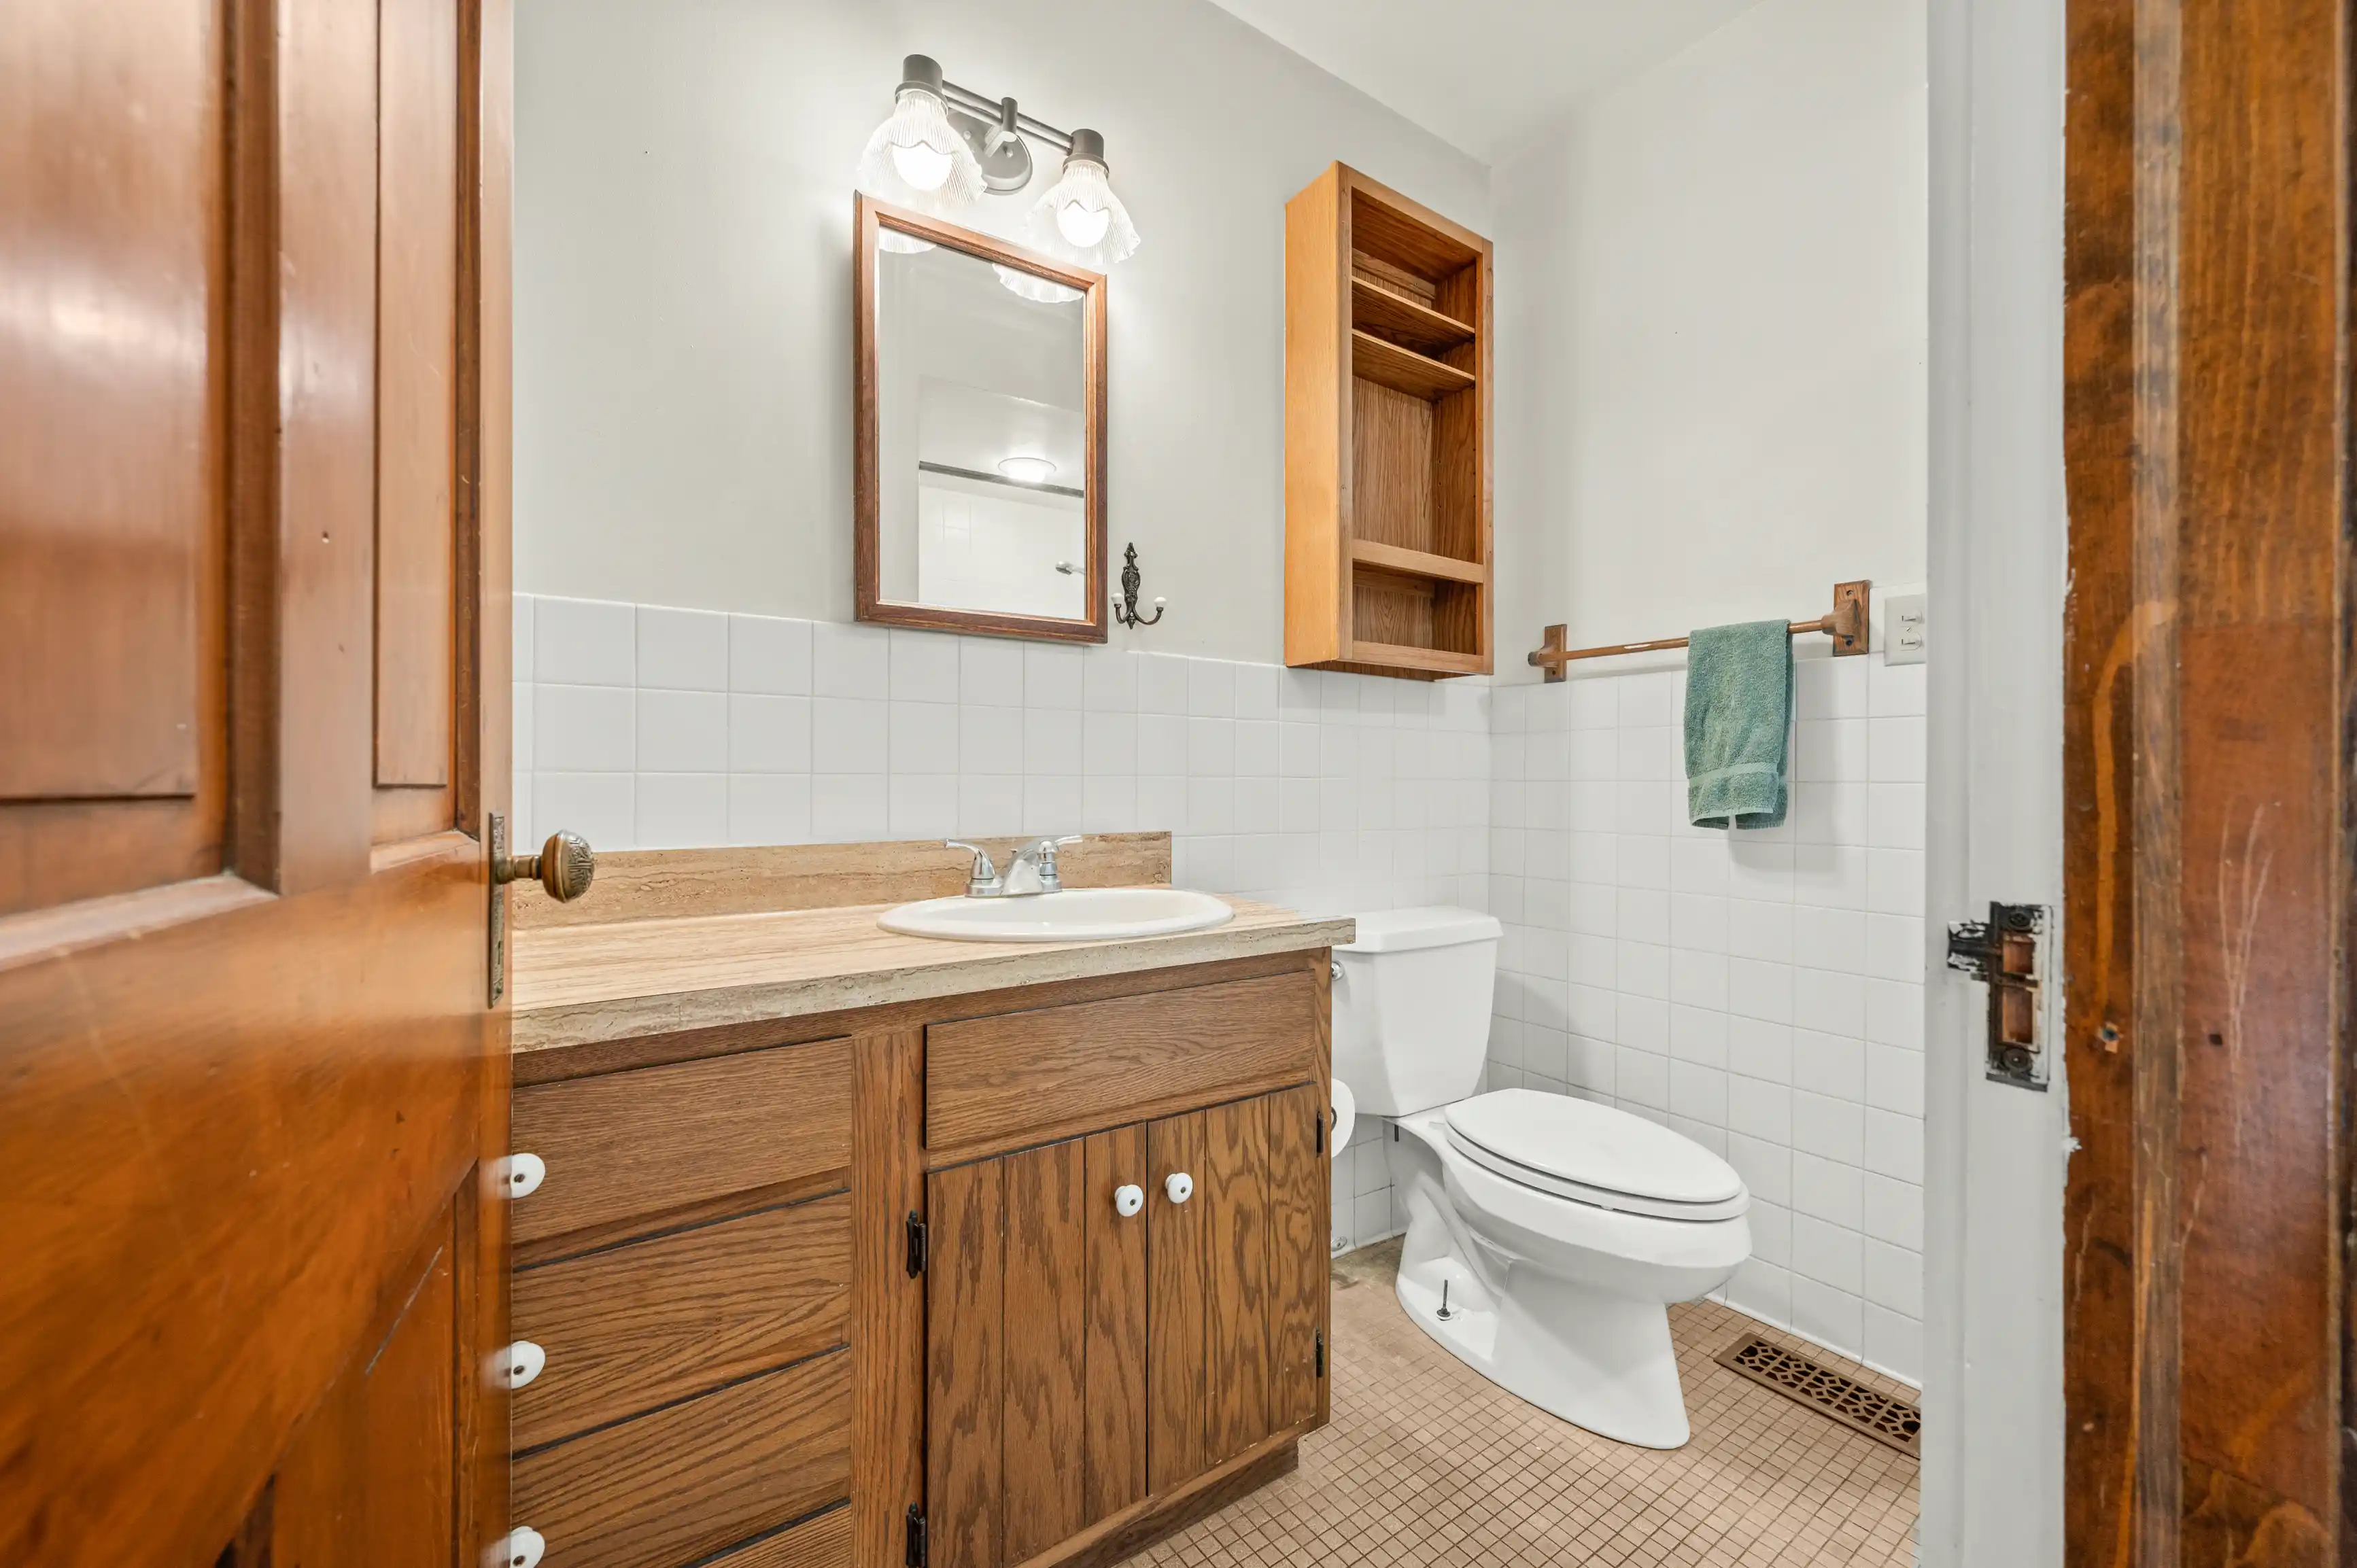 Interior of a small bathroom with wooden vanity, white sink, mirror with overhead light, toilet, white tiling, and wooden open wall cabinet. A green towel hangs on a rack by the door, which is ajar.